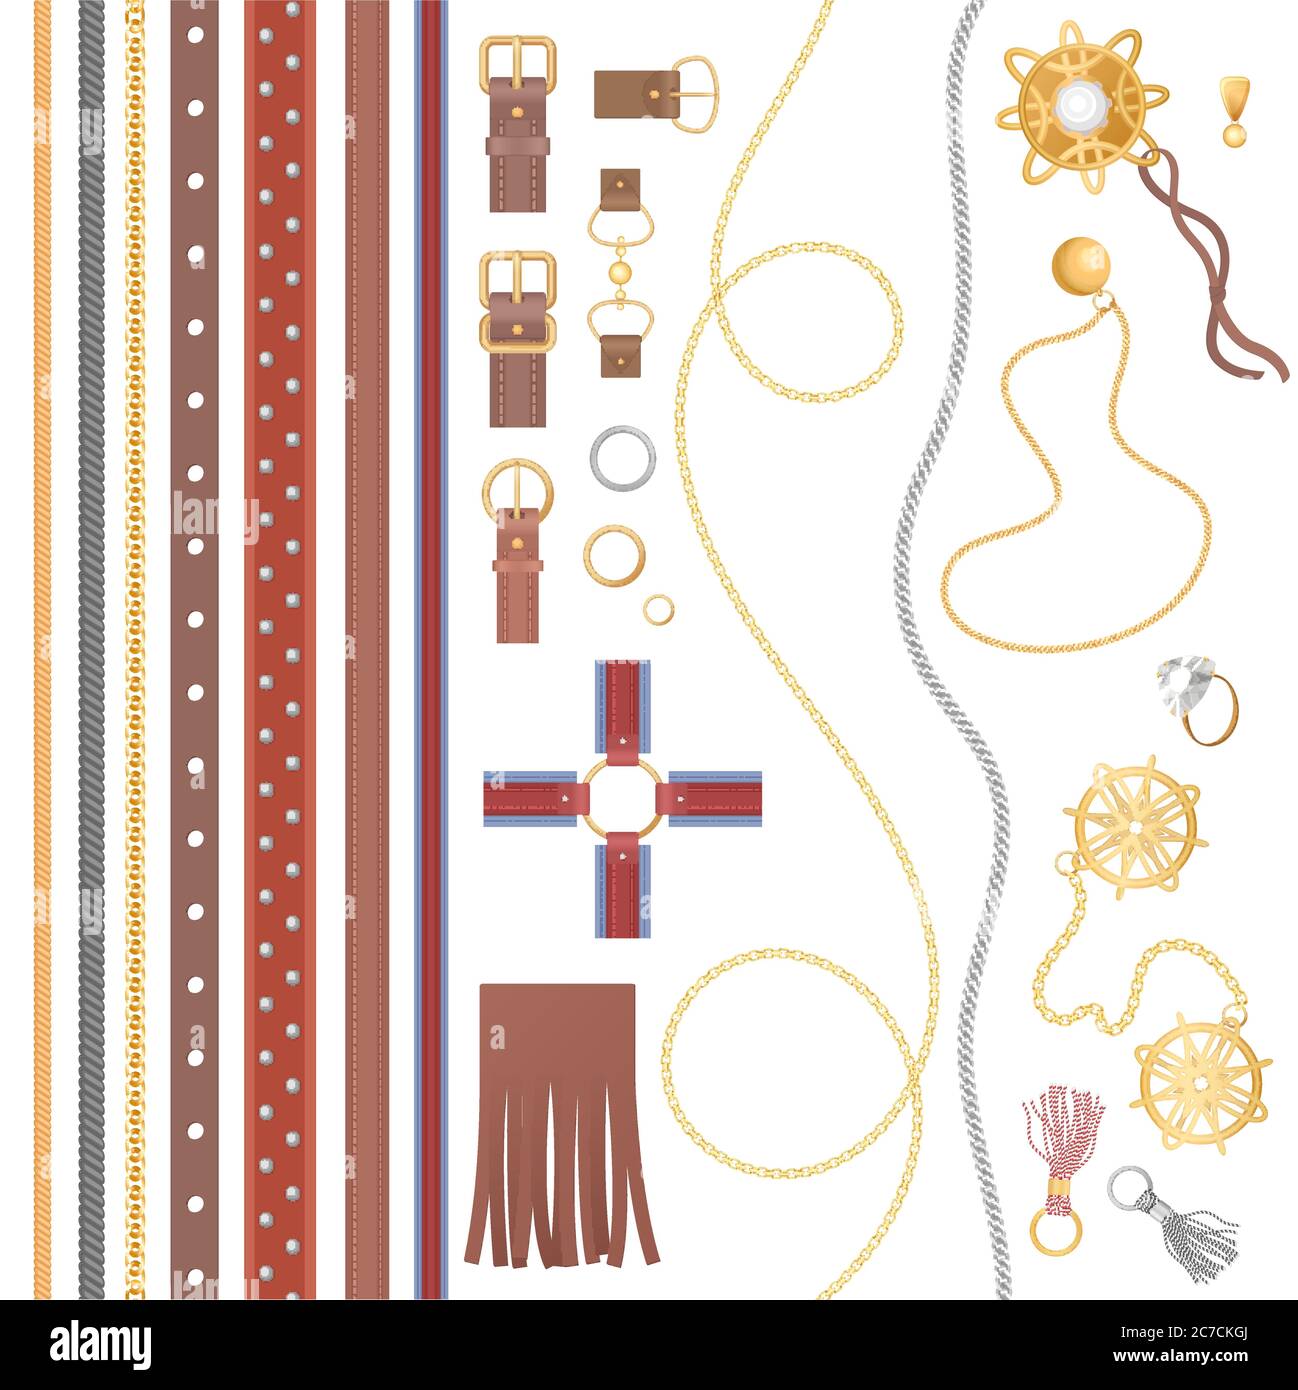 Set of the leather belt, earings, necklace, rings, chain and other luxury design accessories vector illustration Stock Vector